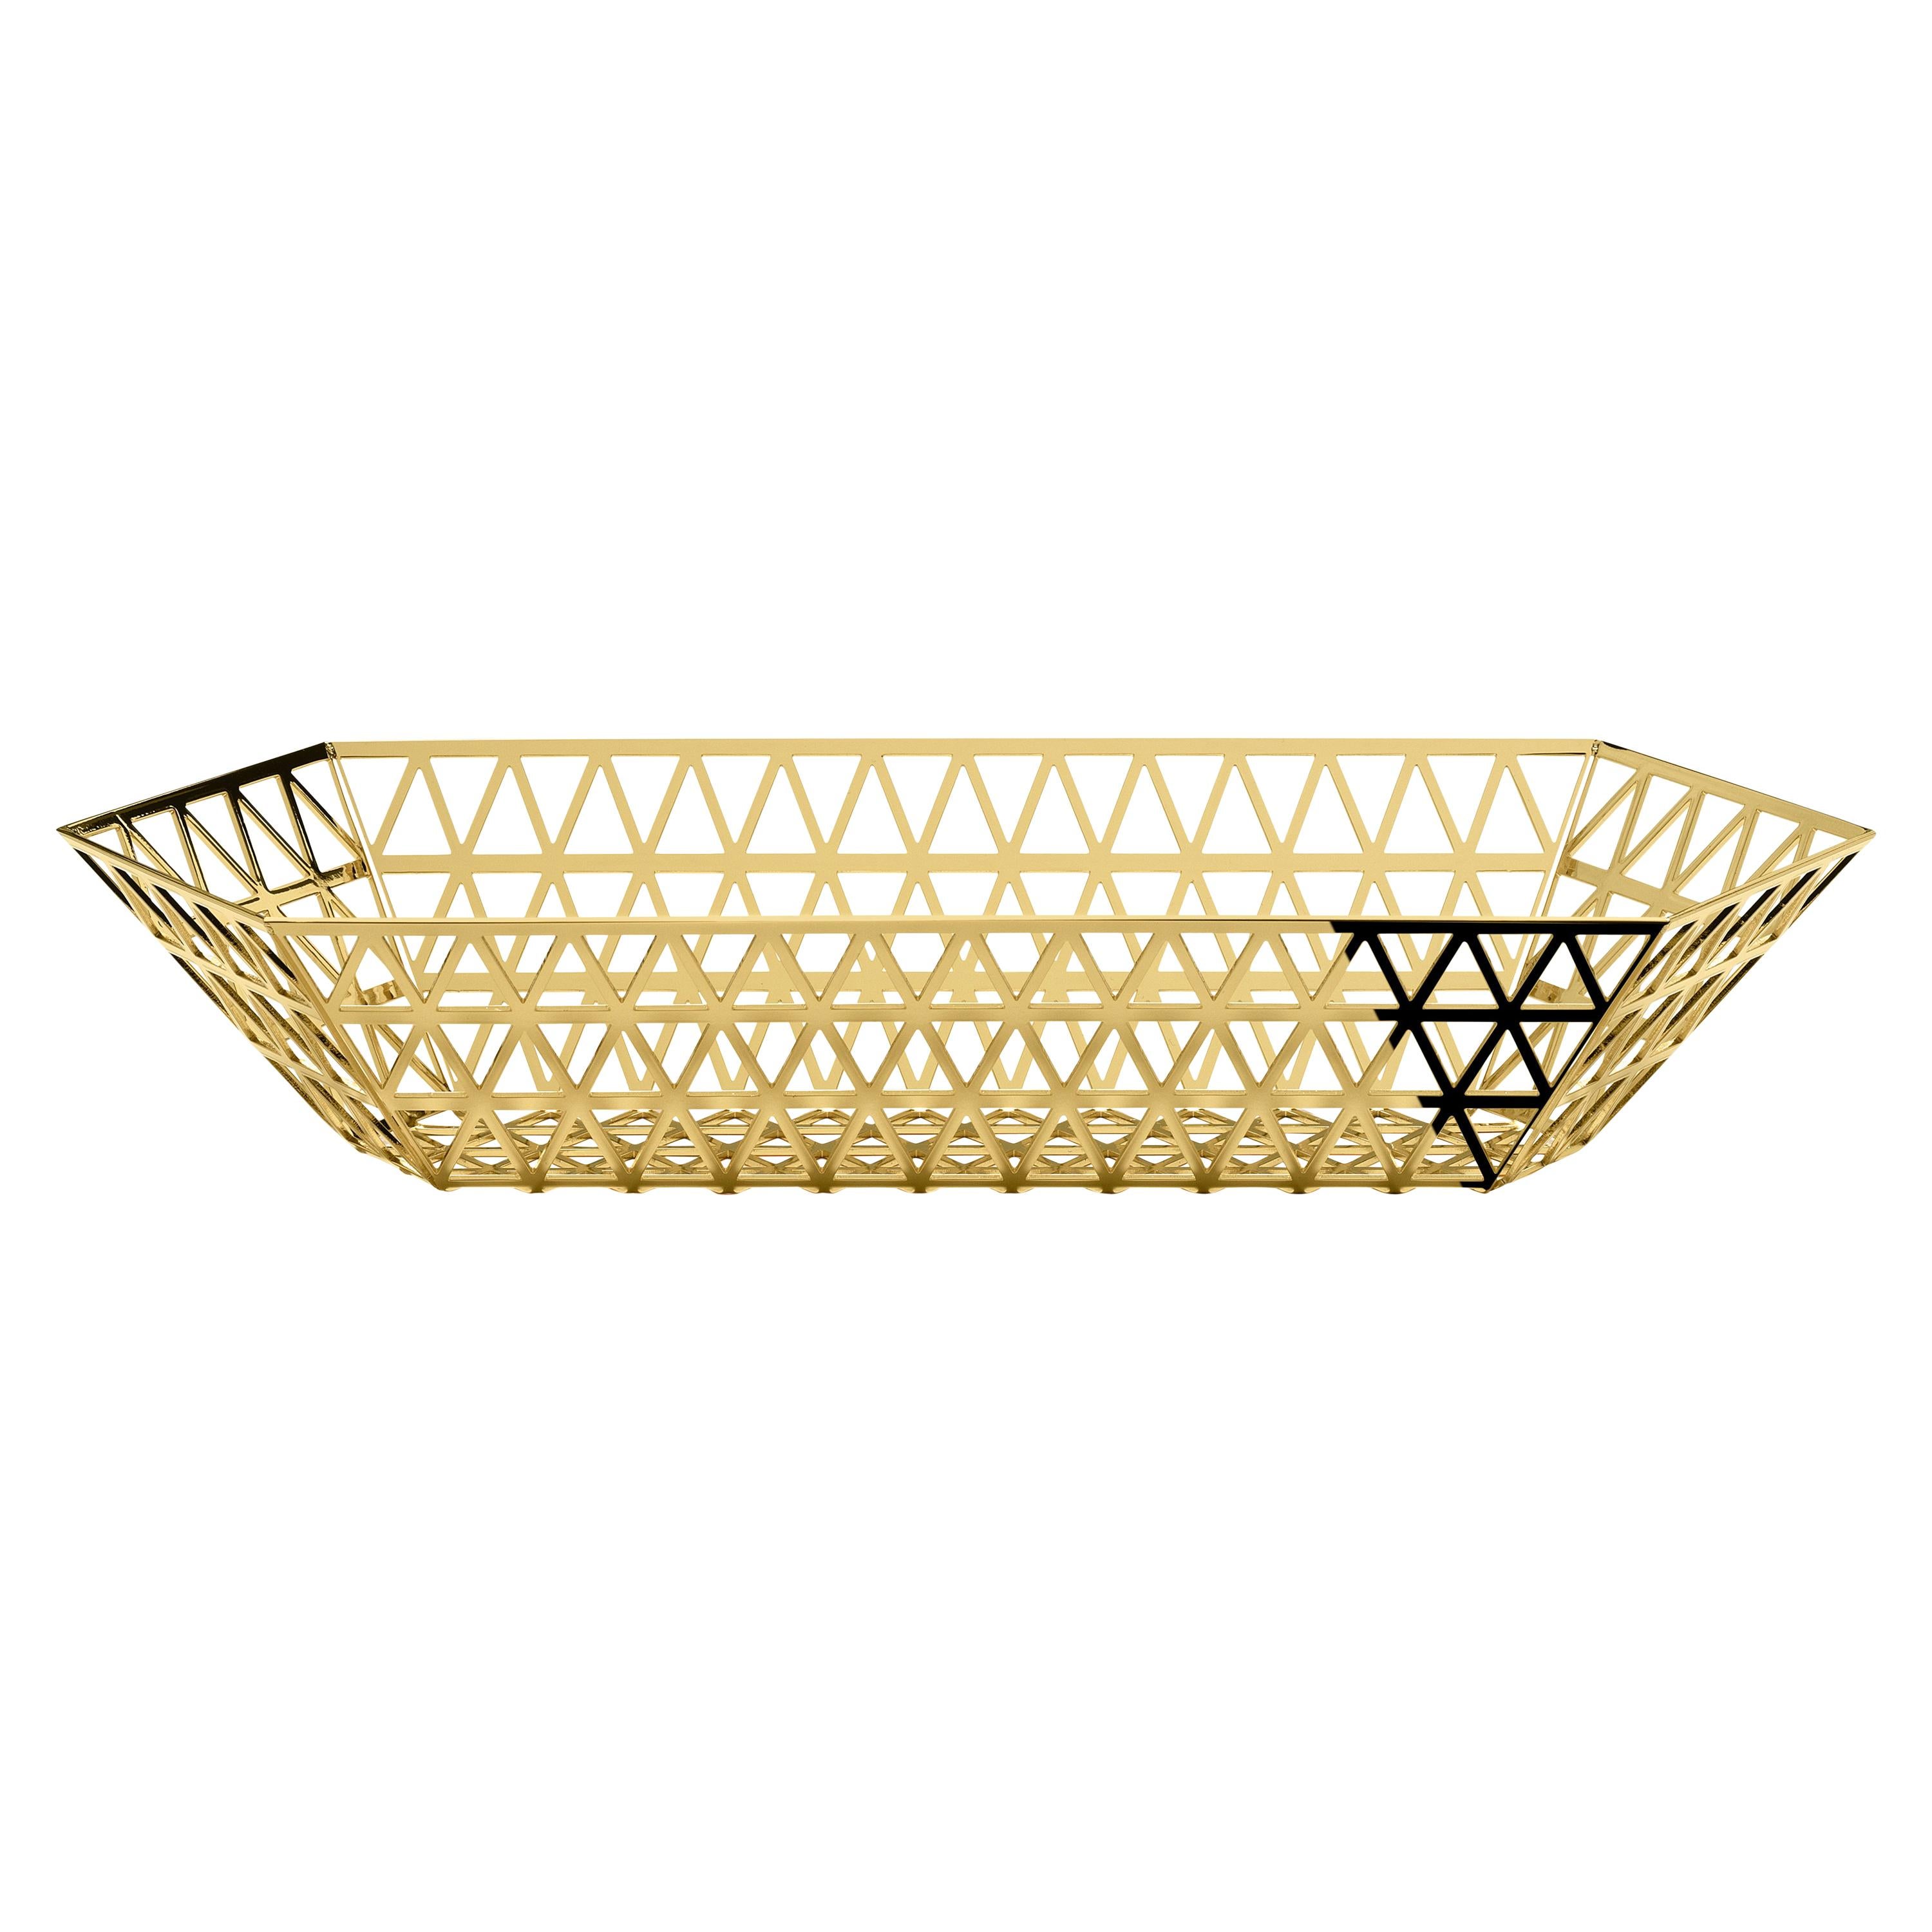 Ghidini 1961 Tip Top Limousine Tray in Gold by Richard Hutten For Sale